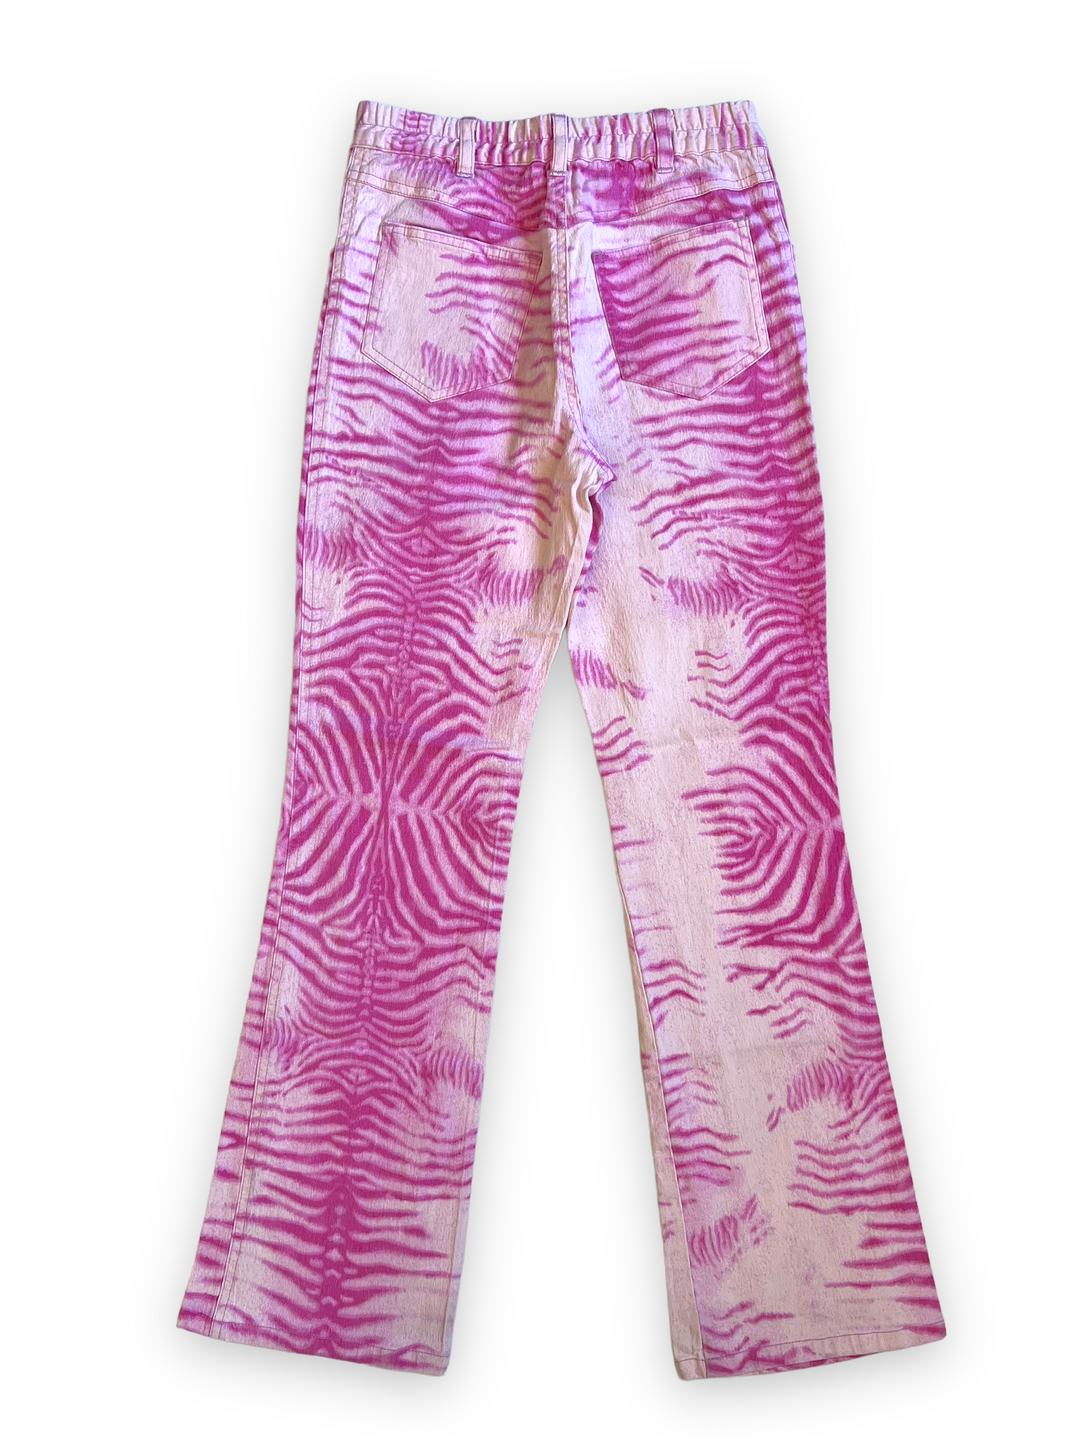 Vintage Mid Waisted Pink Zebra Jeans Women's Extra Small(32)